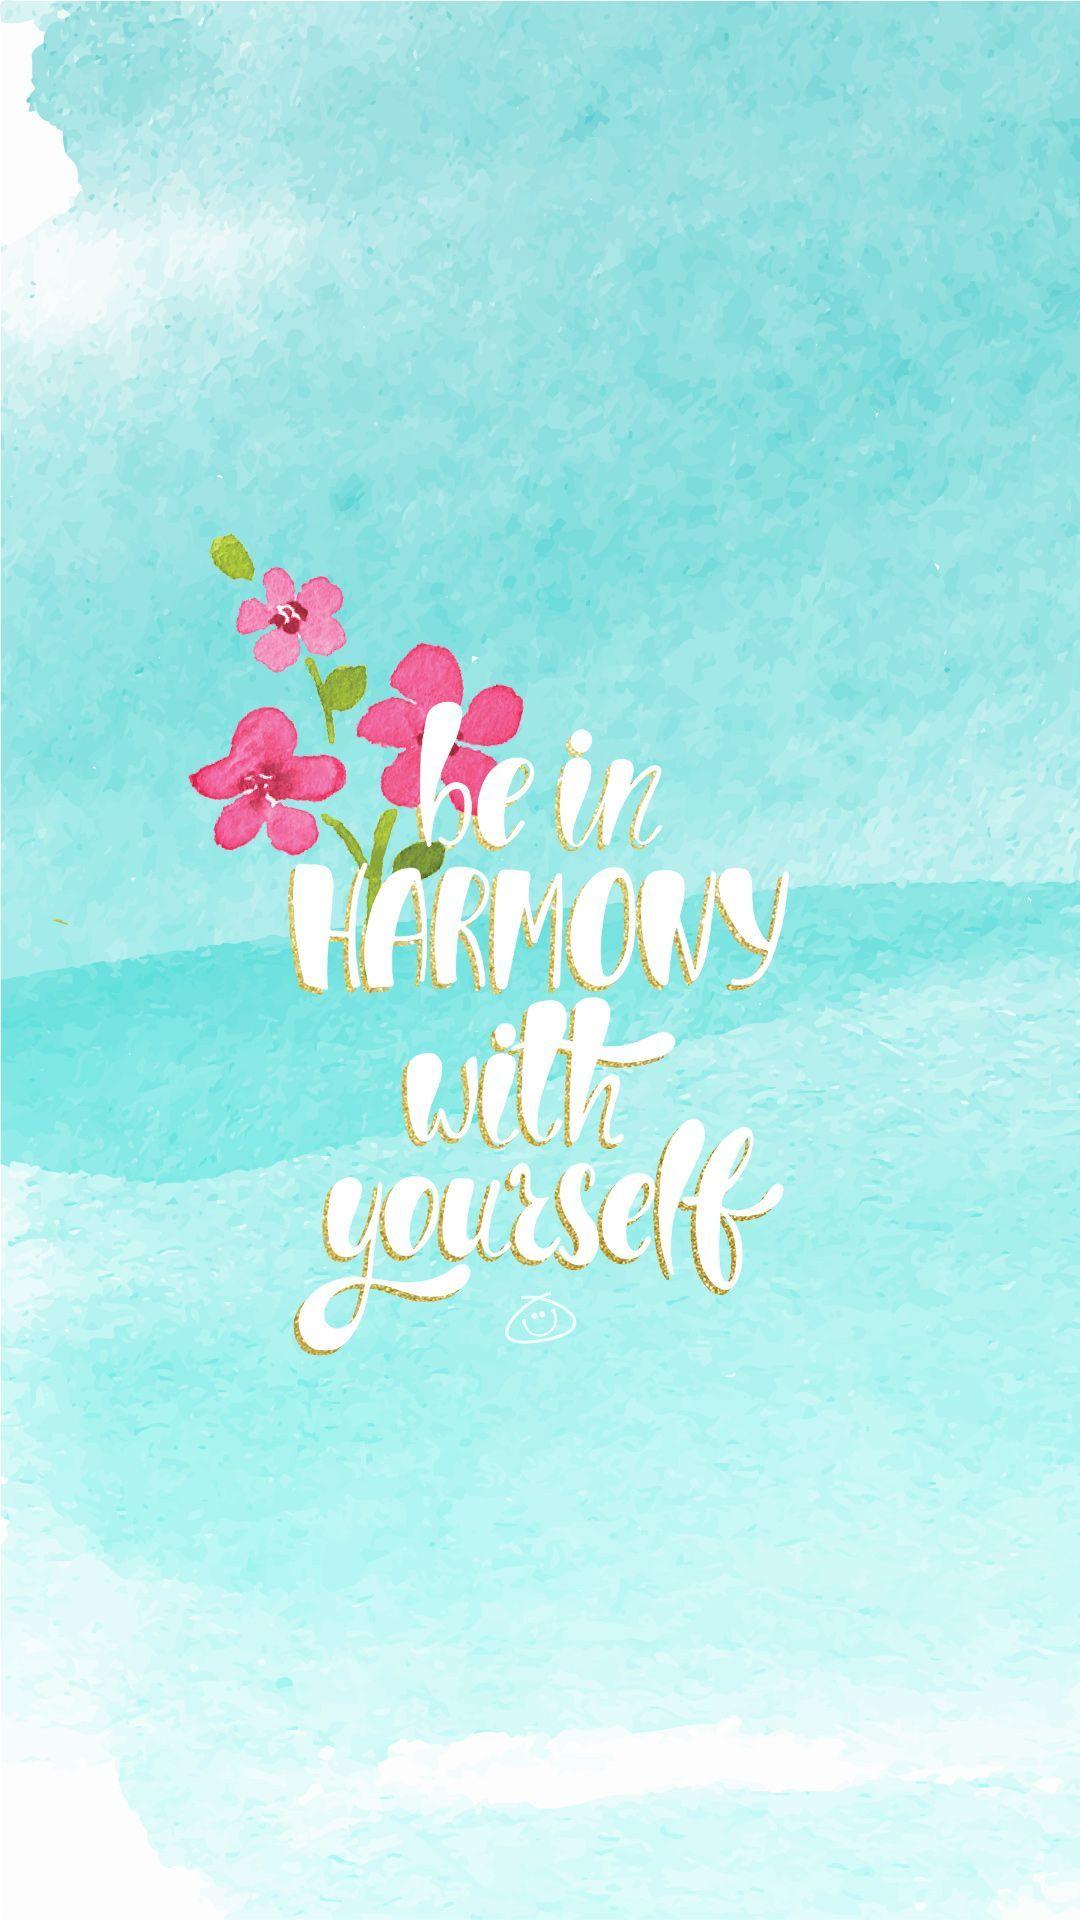 1080 x 1920 · jpeg - Free Colorful Smartphone Wallpaper - Be in harmony with yourself in ...